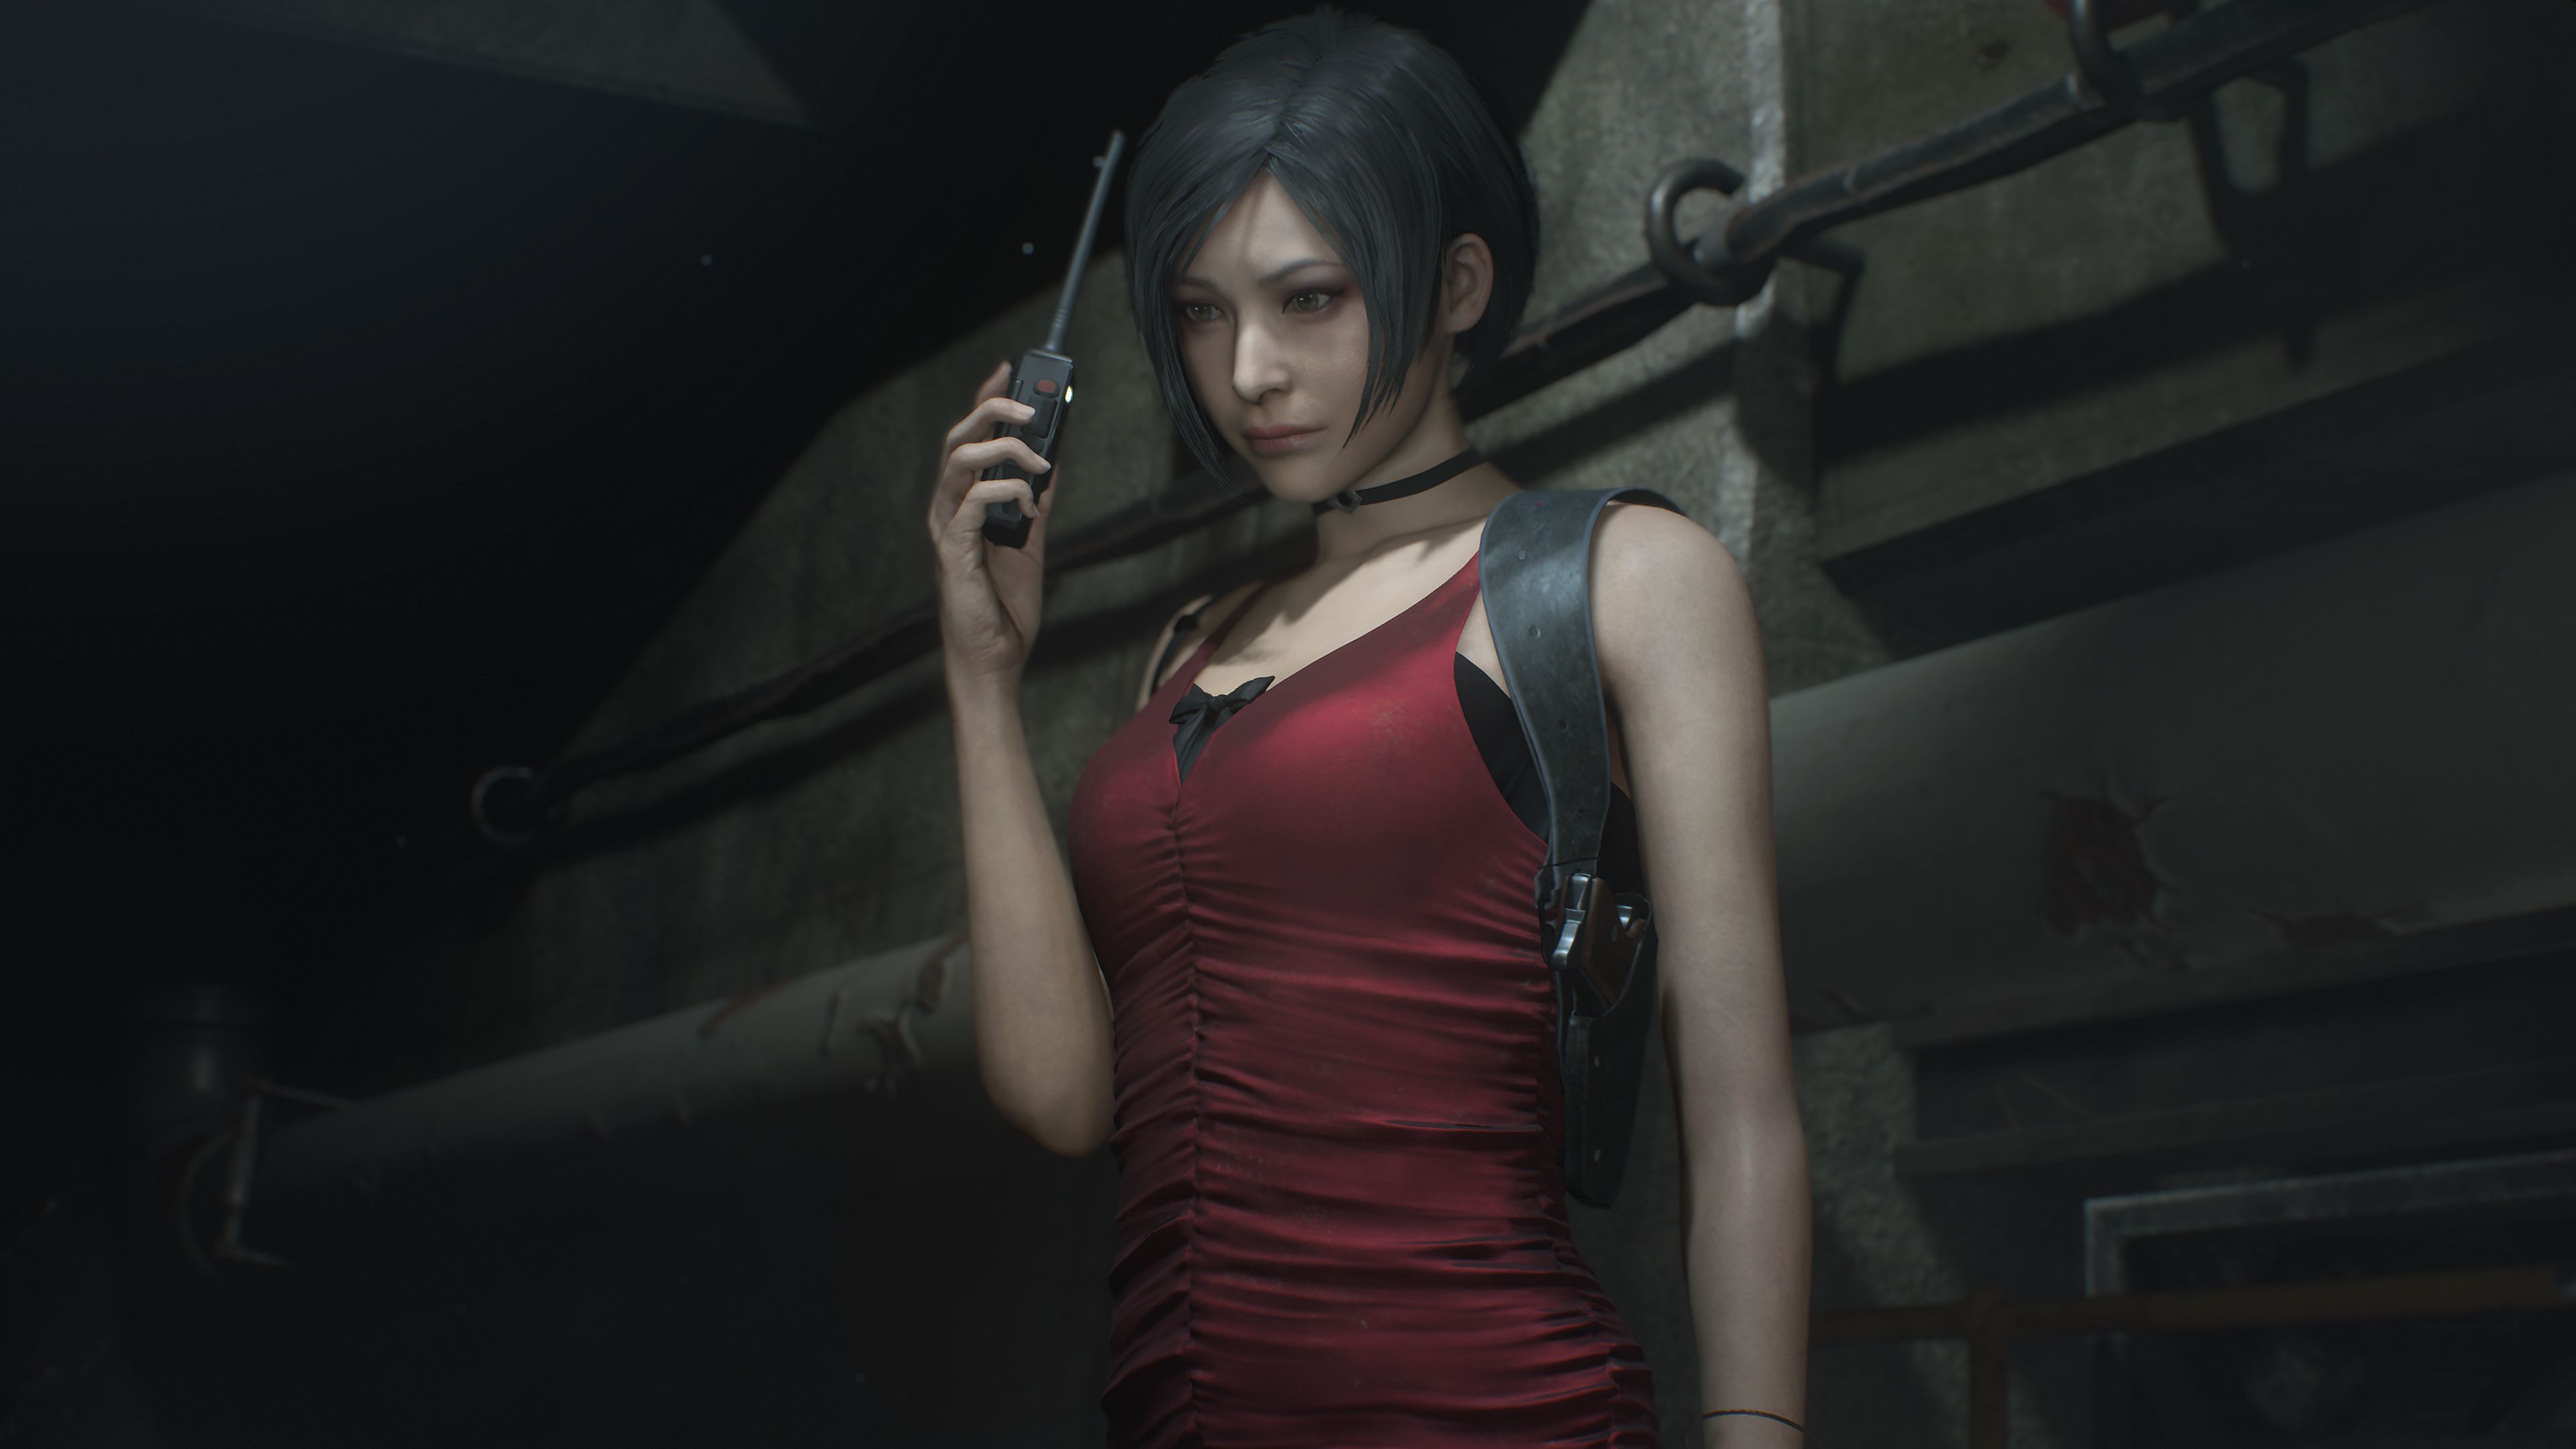 Claire Redfield Resident Evil 2 2019 1440P Resolution HD 4k Wallpaper, Image, Background, Photo and Picture